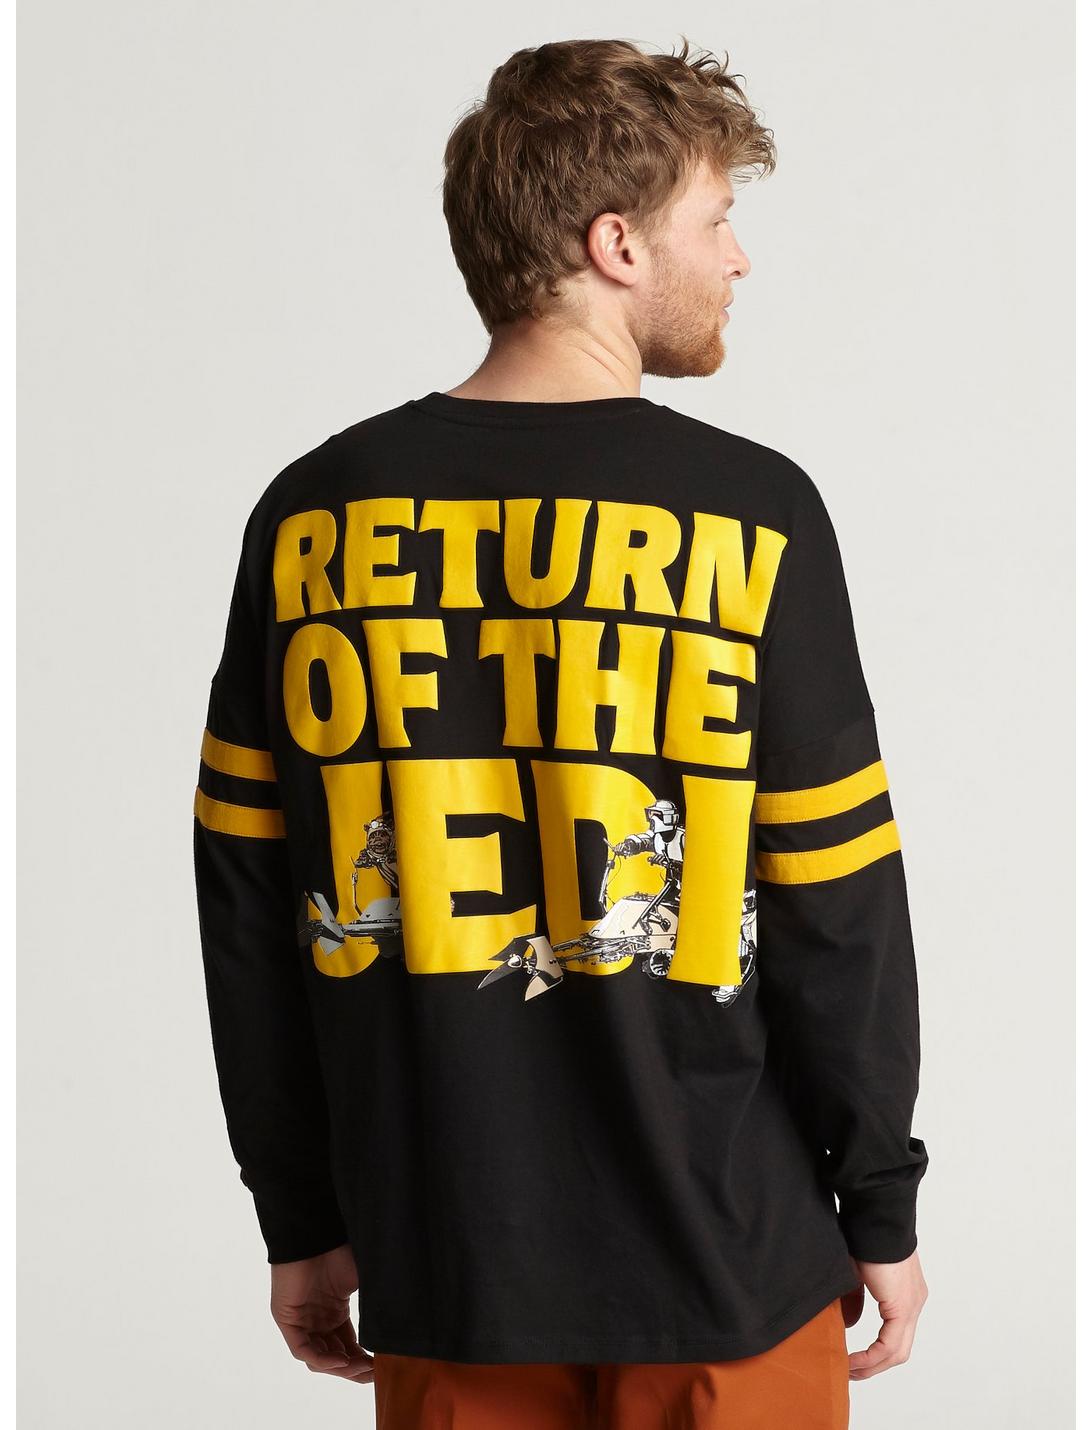 Our Universe Star Wars Return Of The Jedi Athletic Jersey Our Universe Exclusive, BLACK GOLD, hi-res